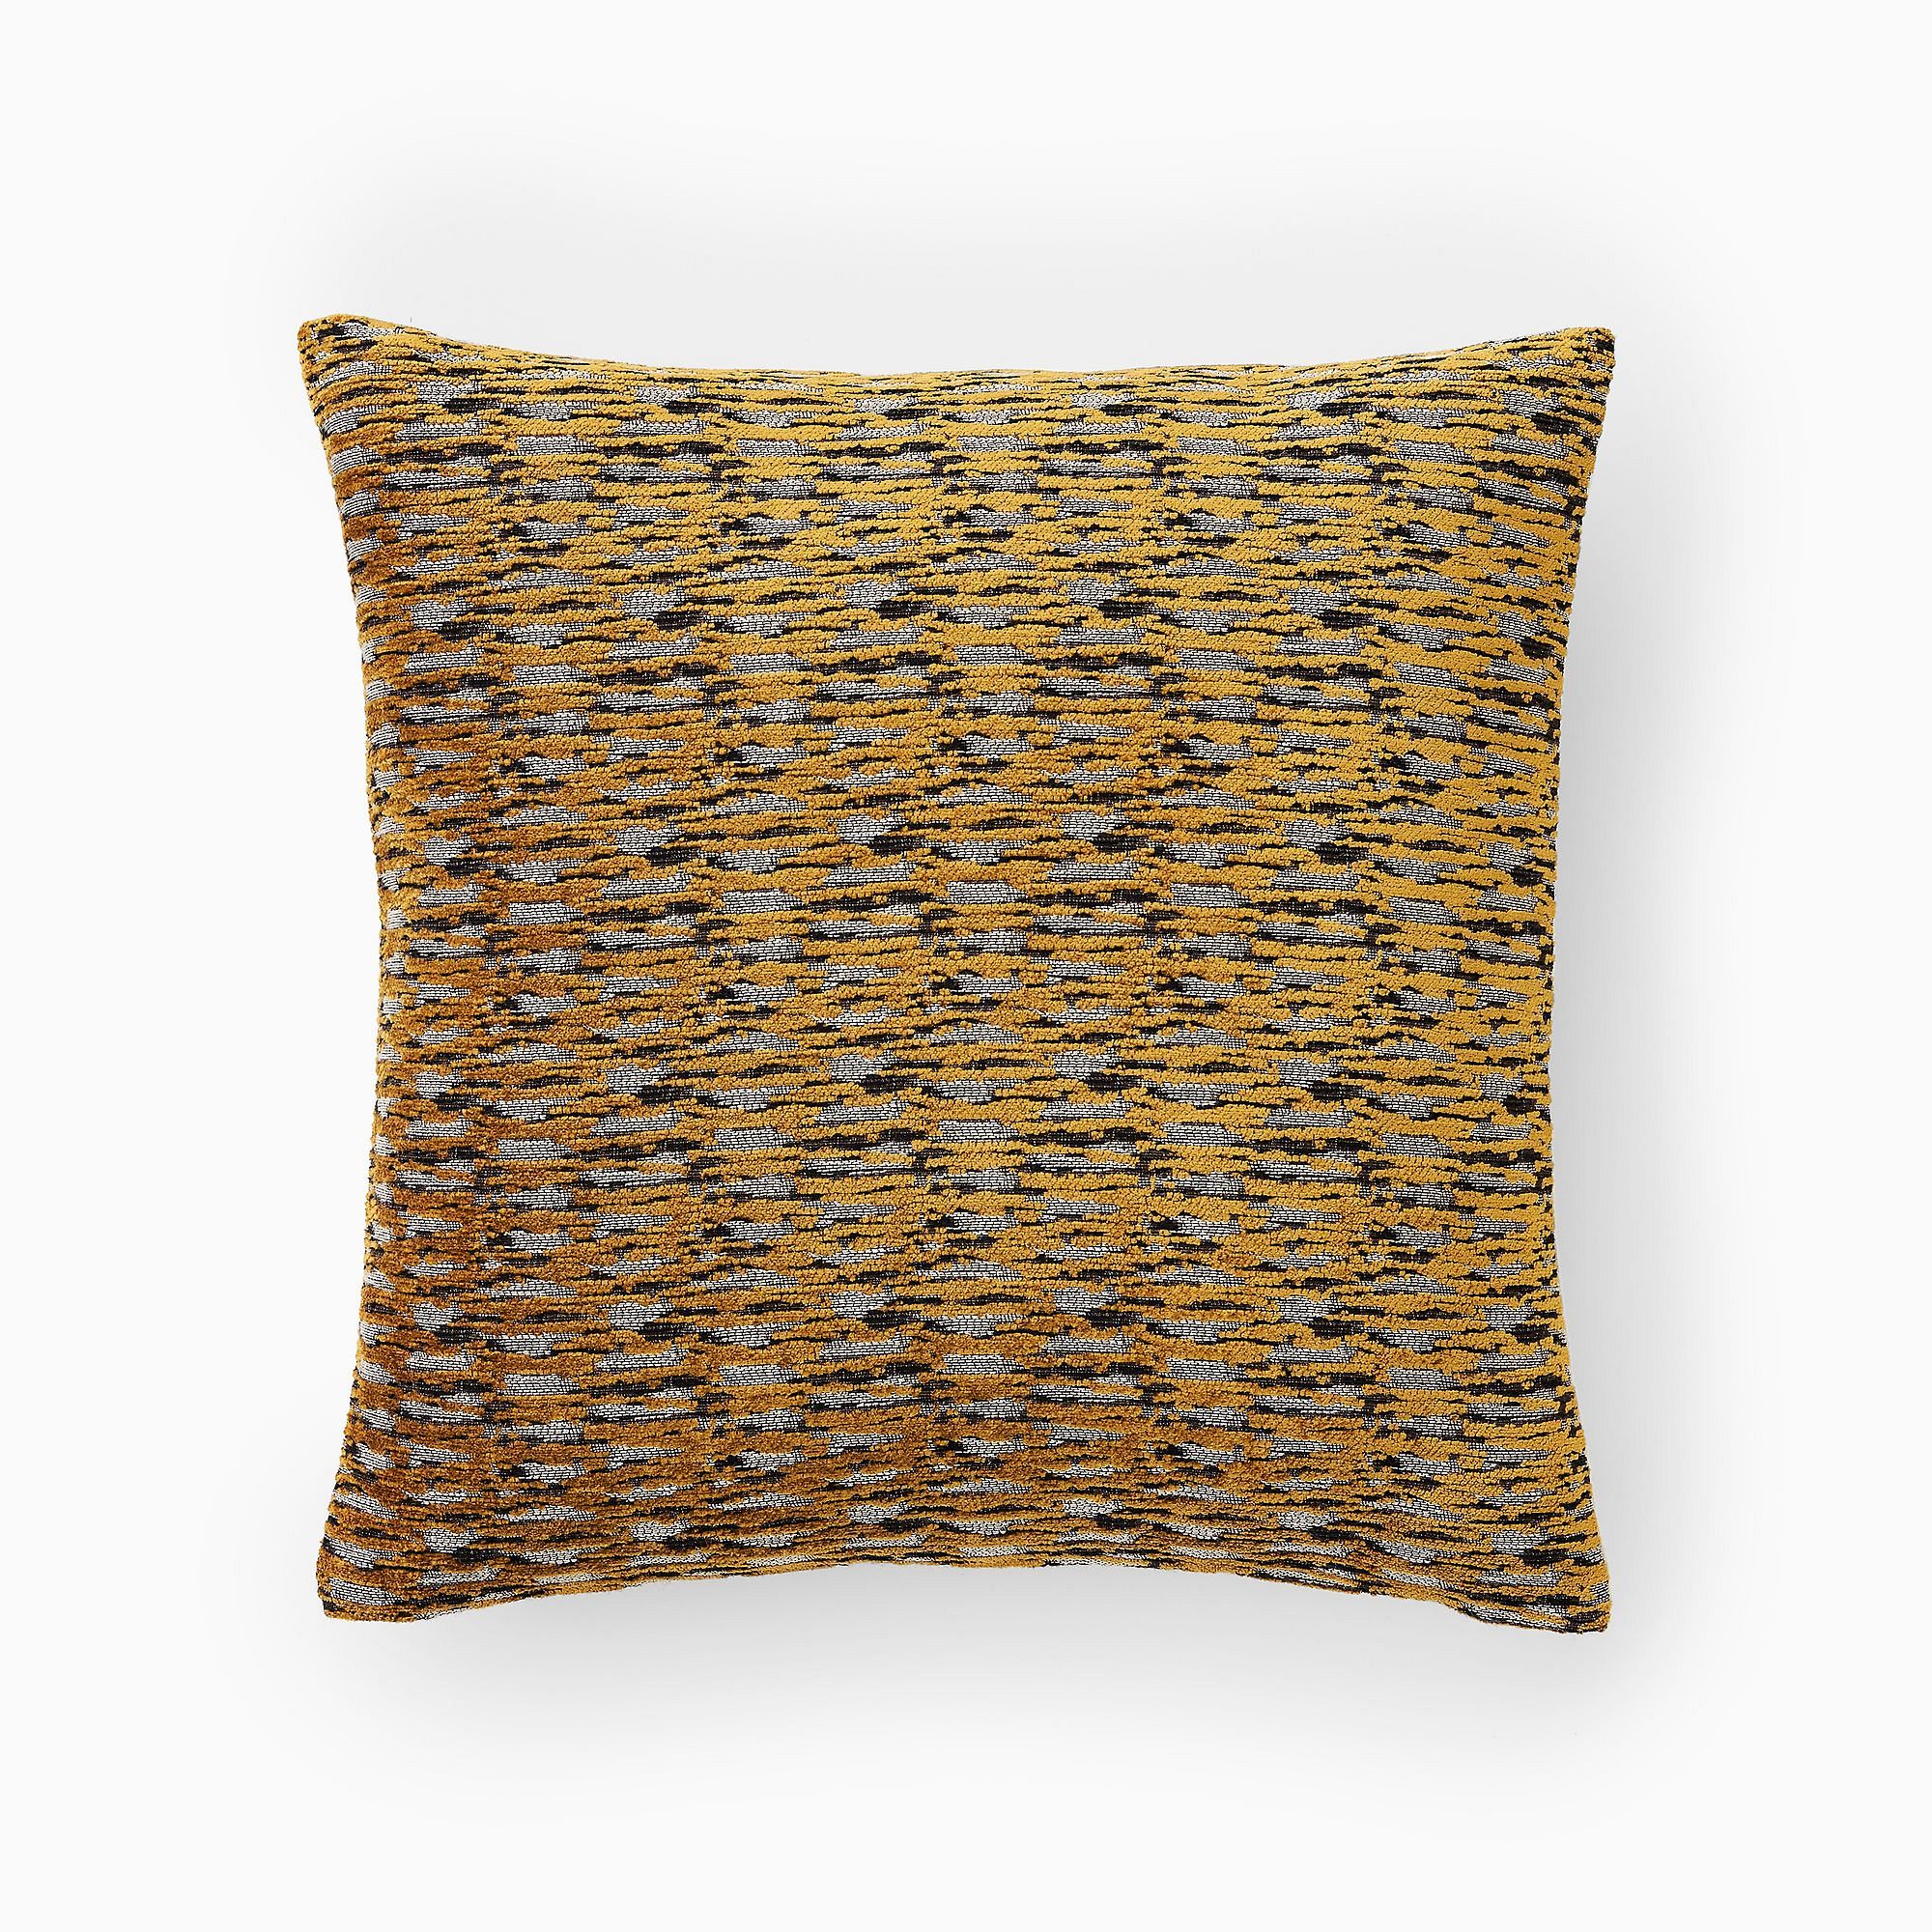 Abstract Linear Chenille Pillow Cover | West Elm